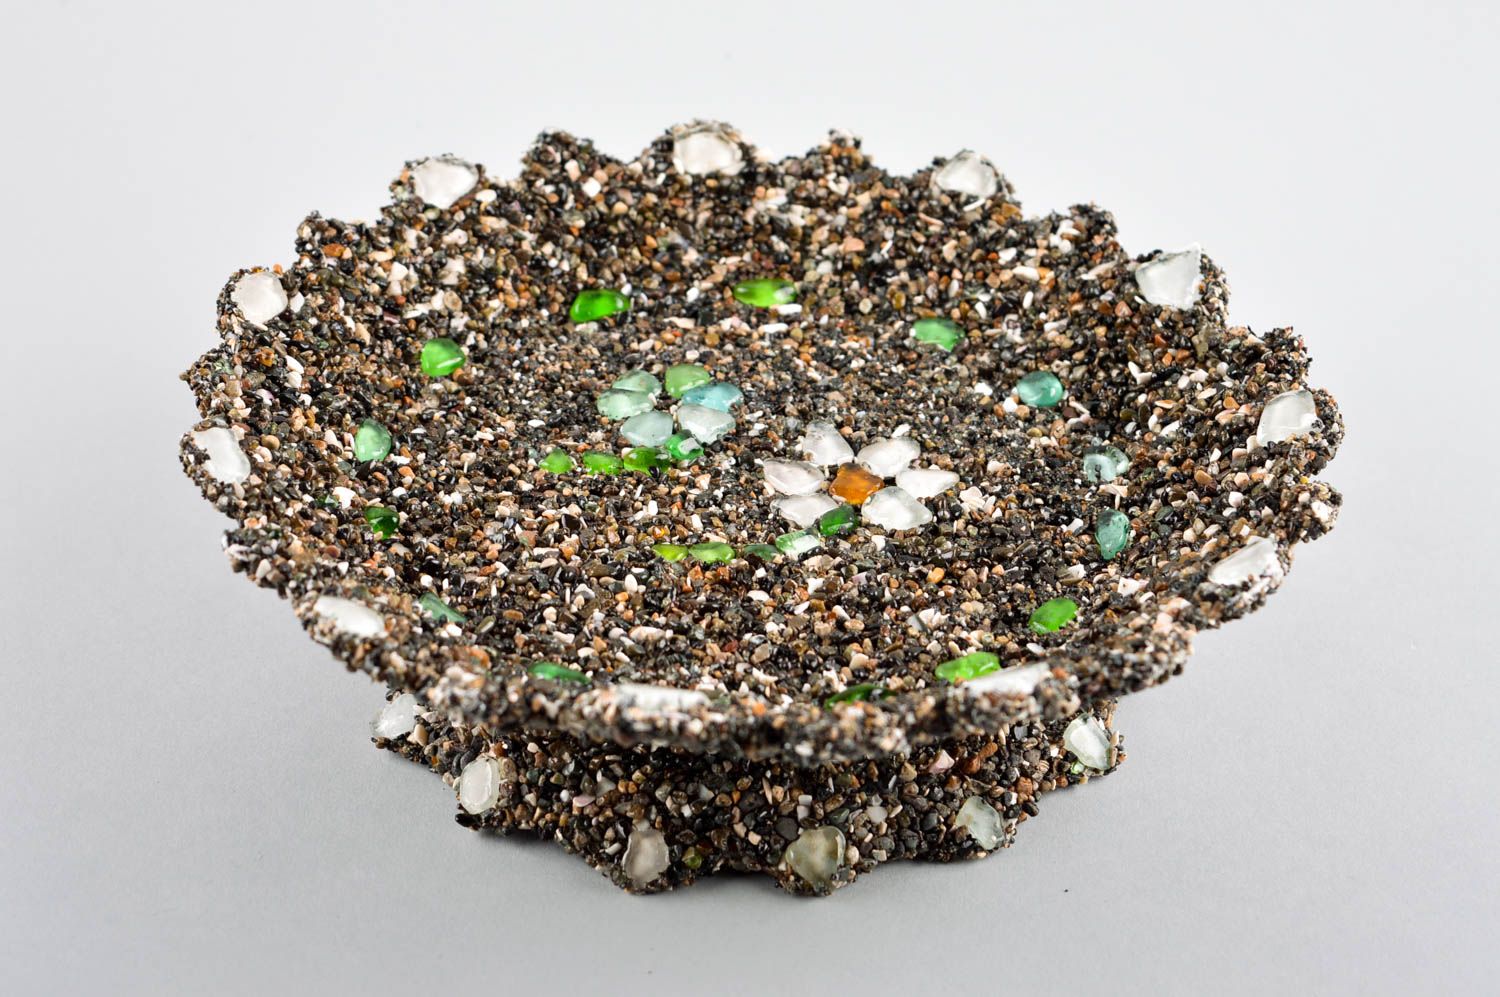 Round candy bowl 9 inches wide made of cardboard covered with sea pebbles 1,26 lb photo 2